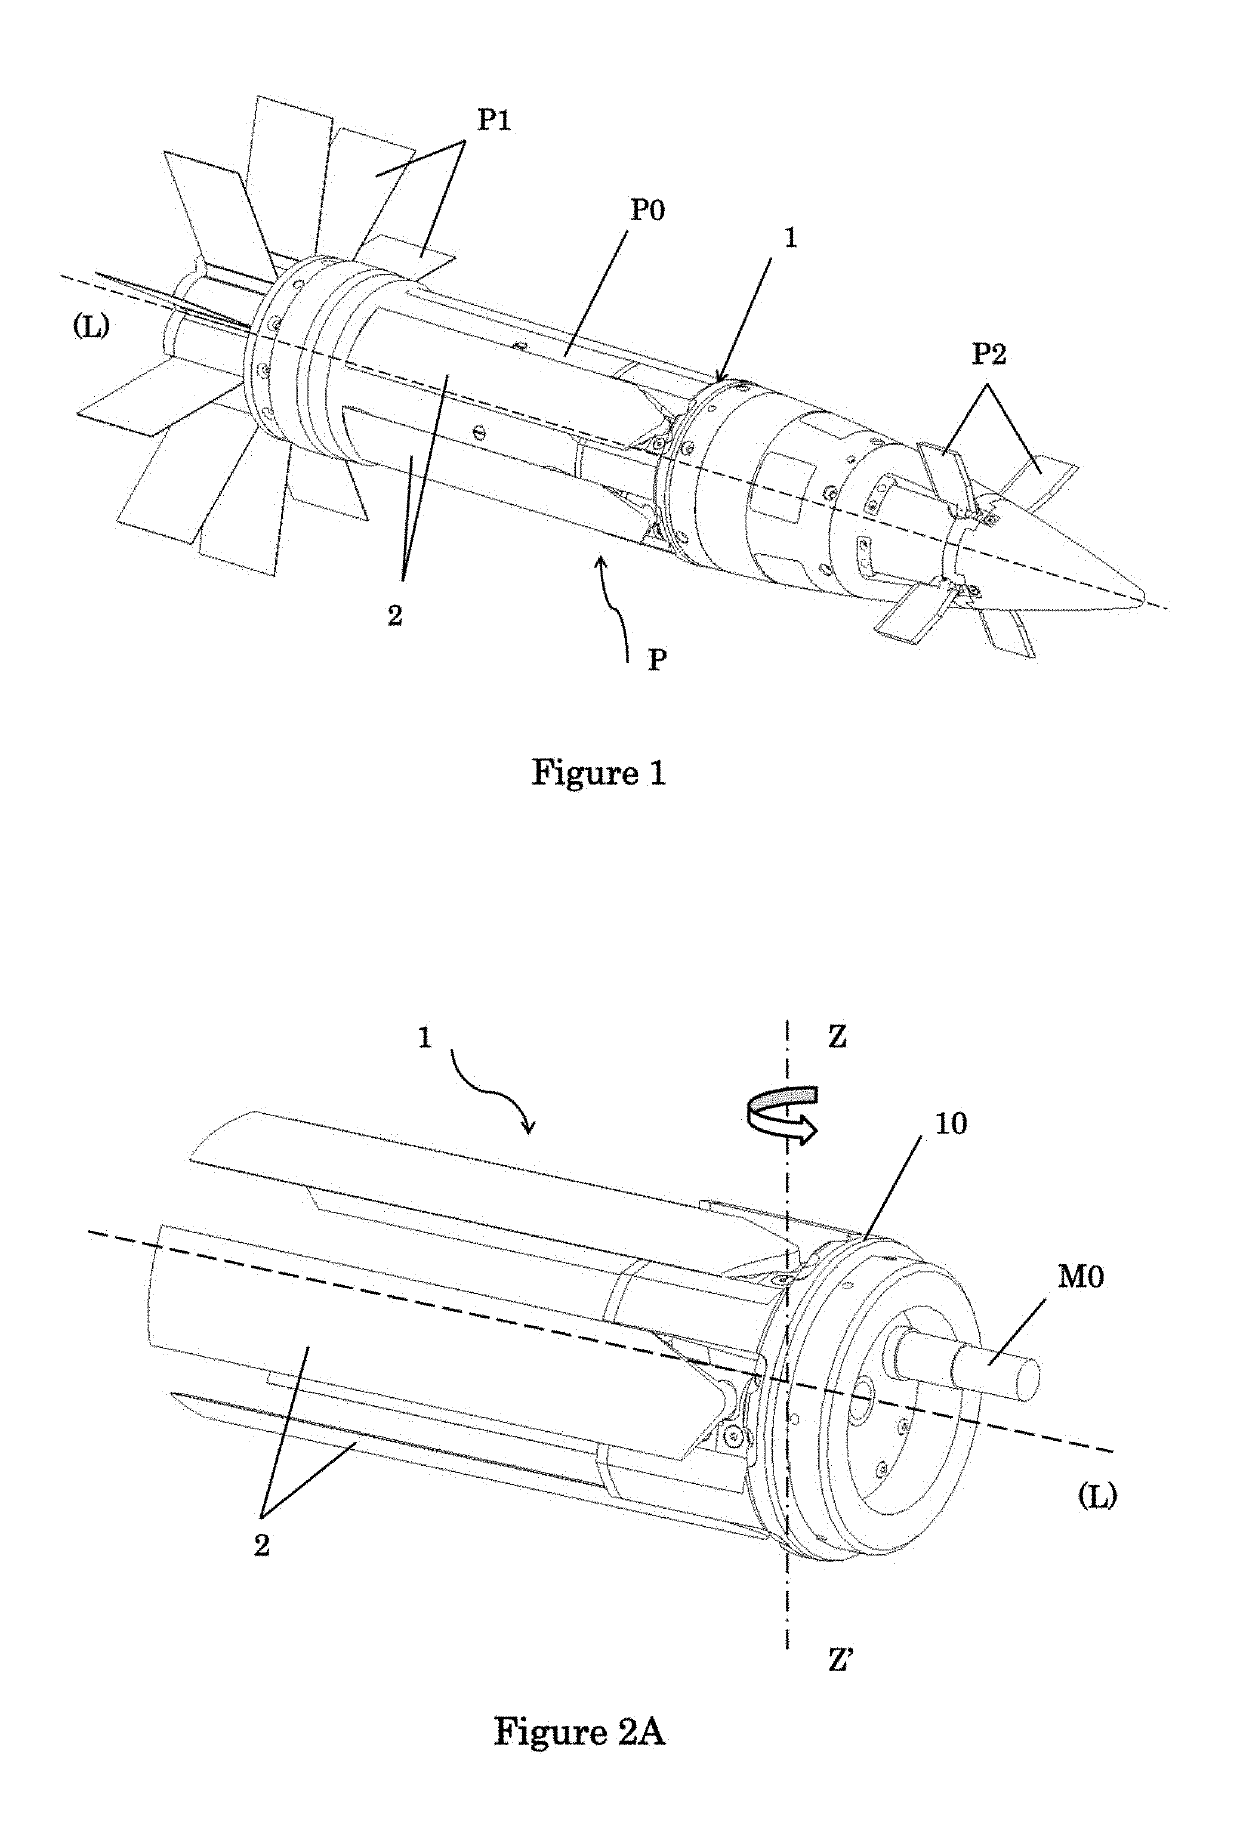 Projectile comprising a device for deploying a wing or fin